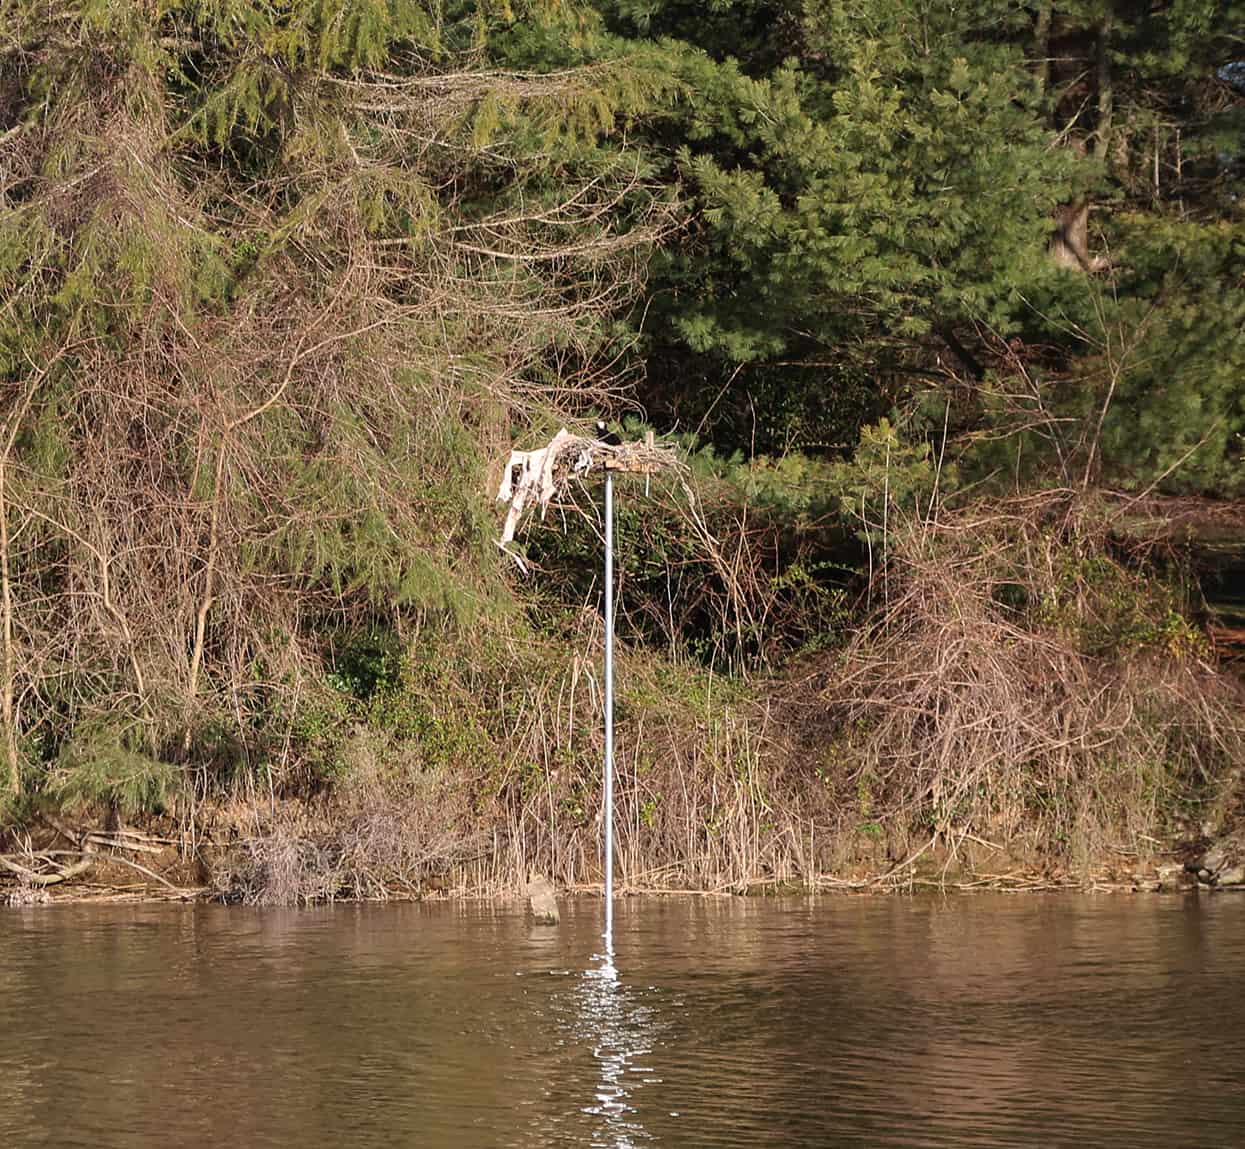  Thanks to concerned neighbors and Chesapeake Wildlife Heritage, the osprey couple has a nice, level platform. Photo: Wendy Mitman Clarke 